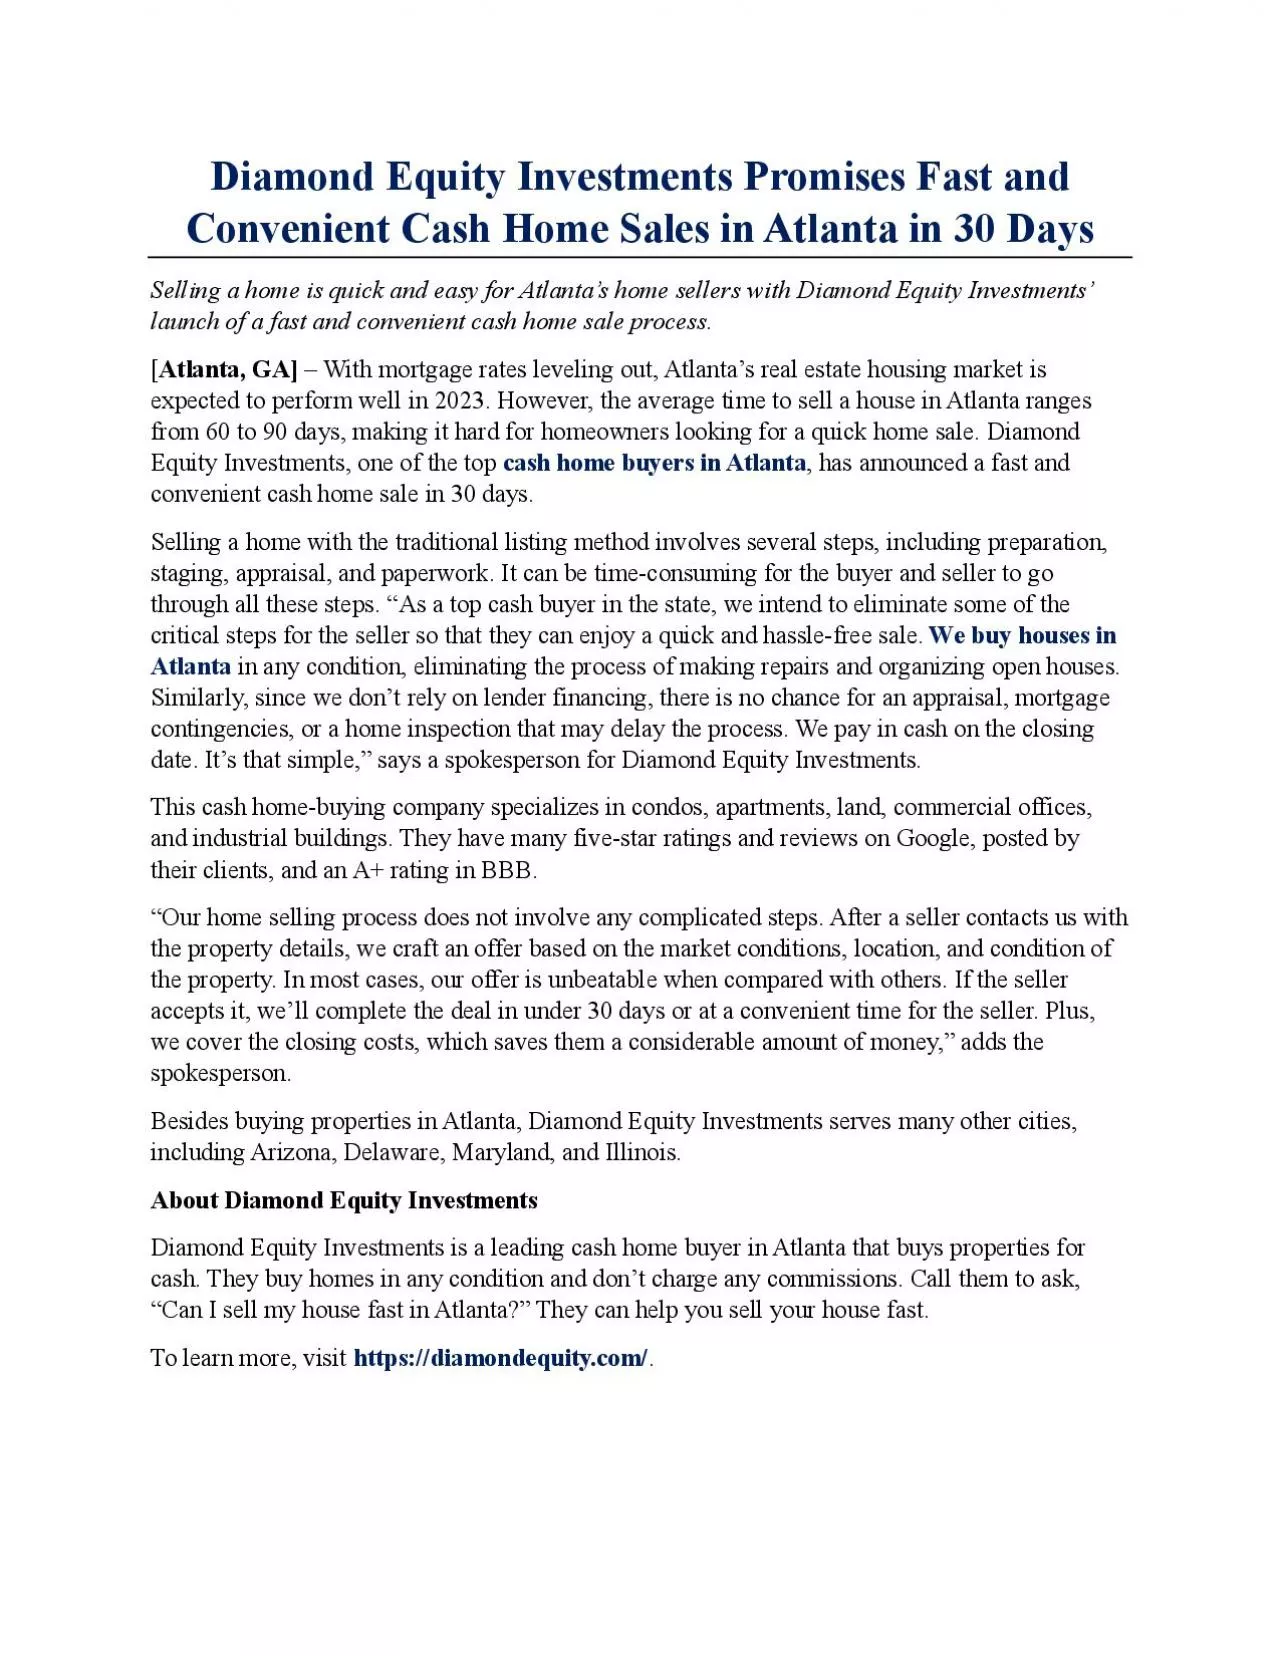 Diamond Equity Investments Promises Fast and Convenient Cash Home Sales in Atlanta in